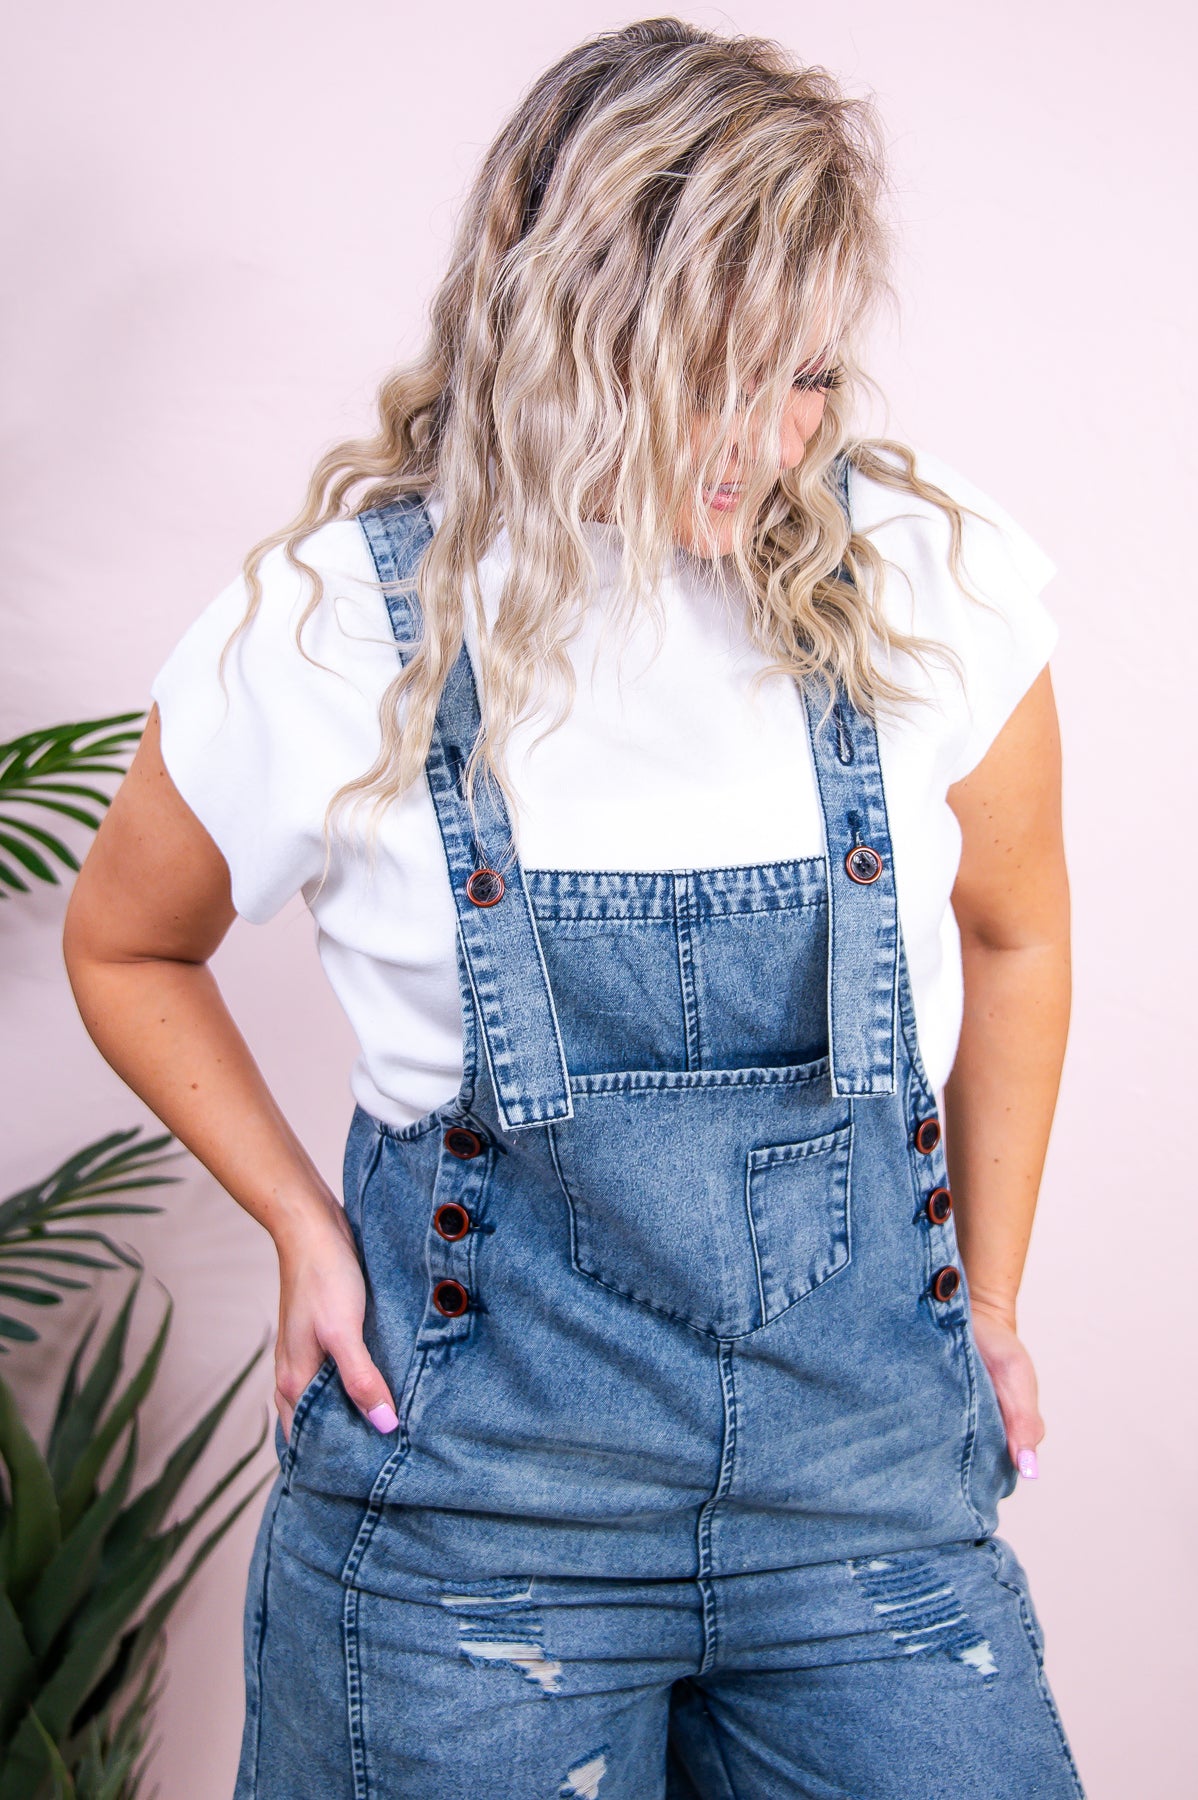 She is Beauty And Grace Vintage Denim Distressed Overalls - RMP780VDN